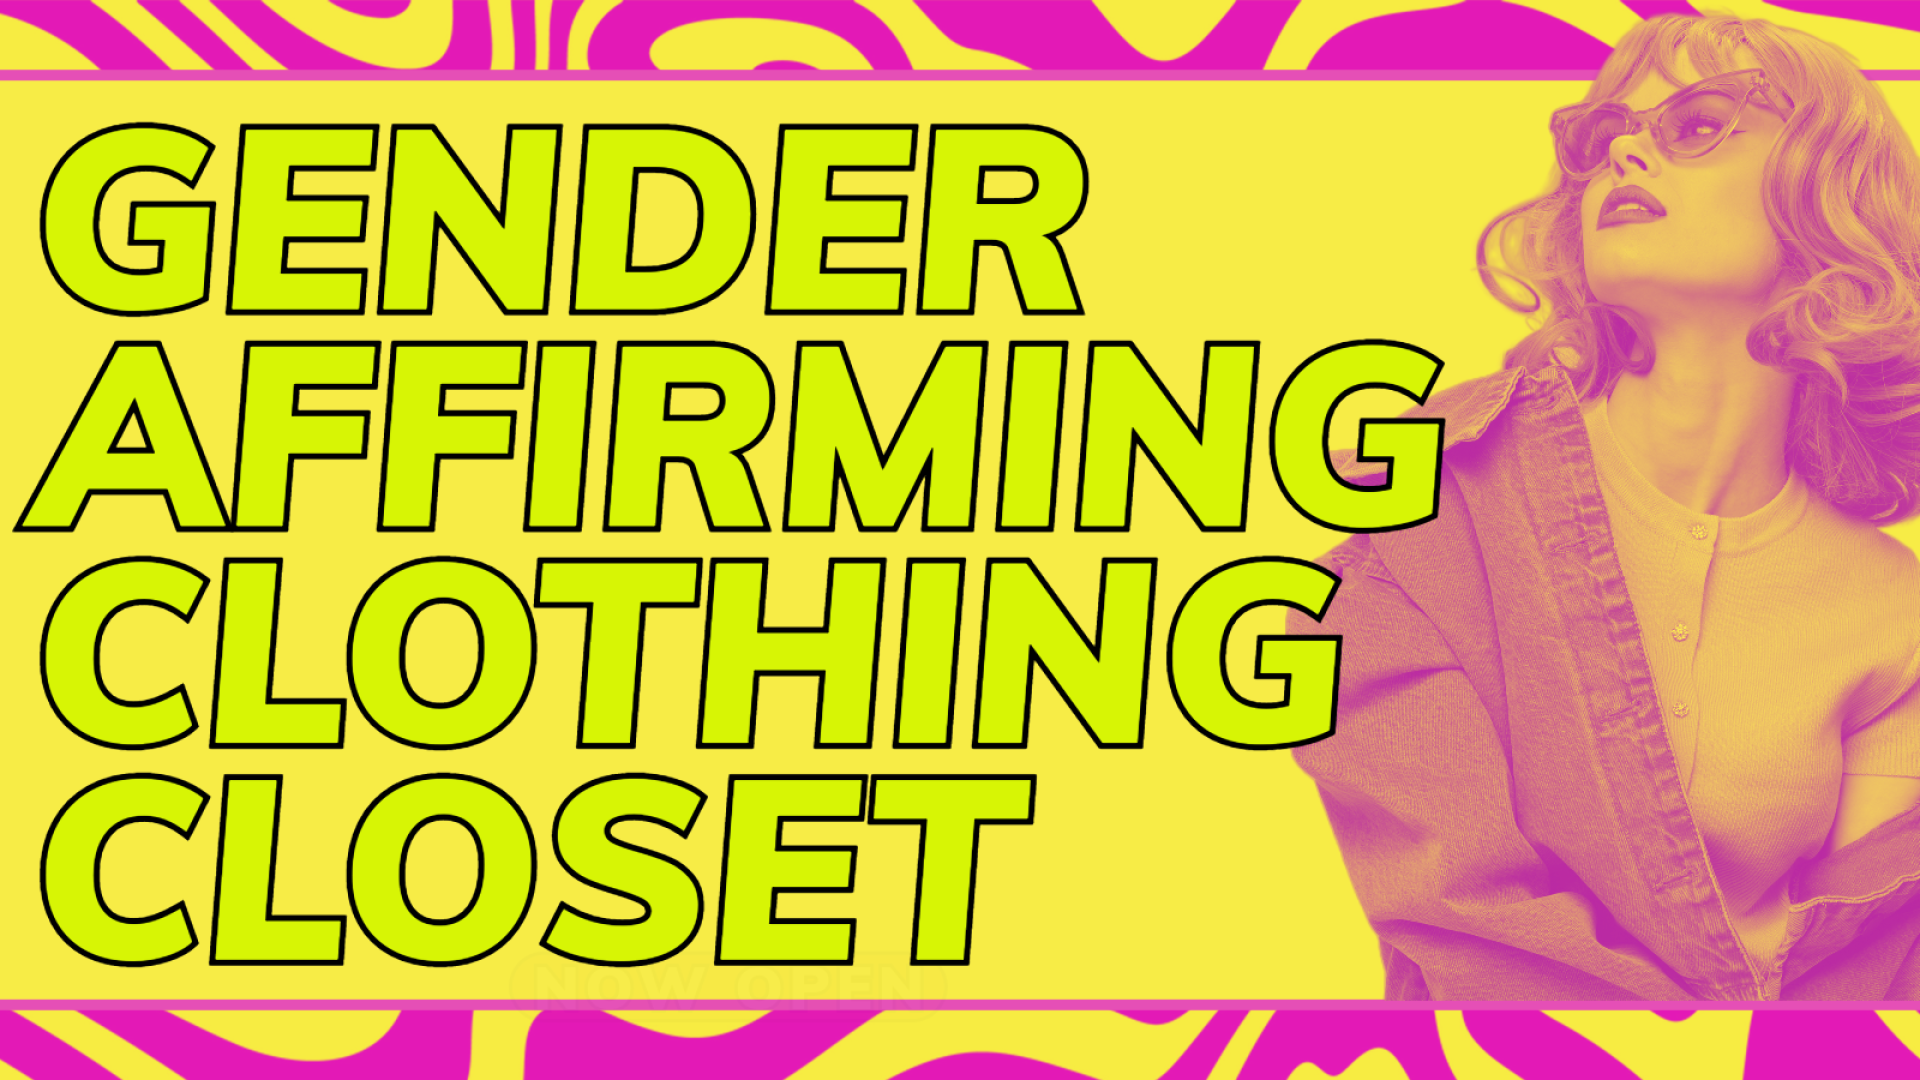 Gender affirming clothing closet, person with glasses and a denim jacket posing